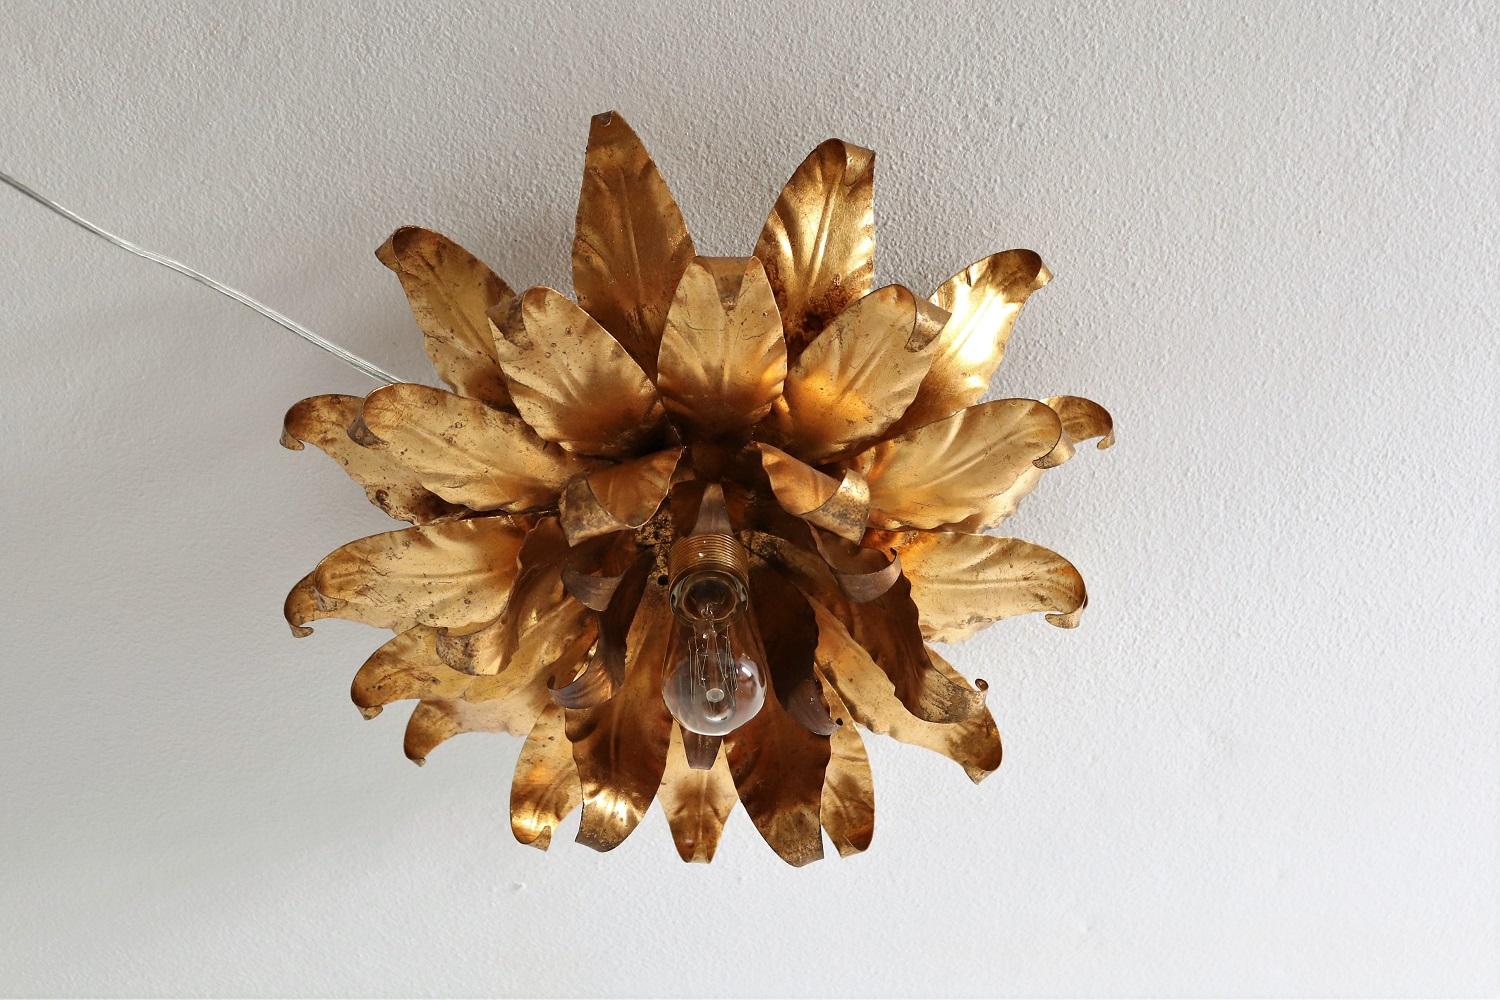 Gorgeous flush mount ceiling light with strong big leaves Made in Germany by Kögl in the 1970s.
The ceiling light has a beautiful golden color with little patina.
One middle light bulb holder for an Edison bulb which makes nice soft light and